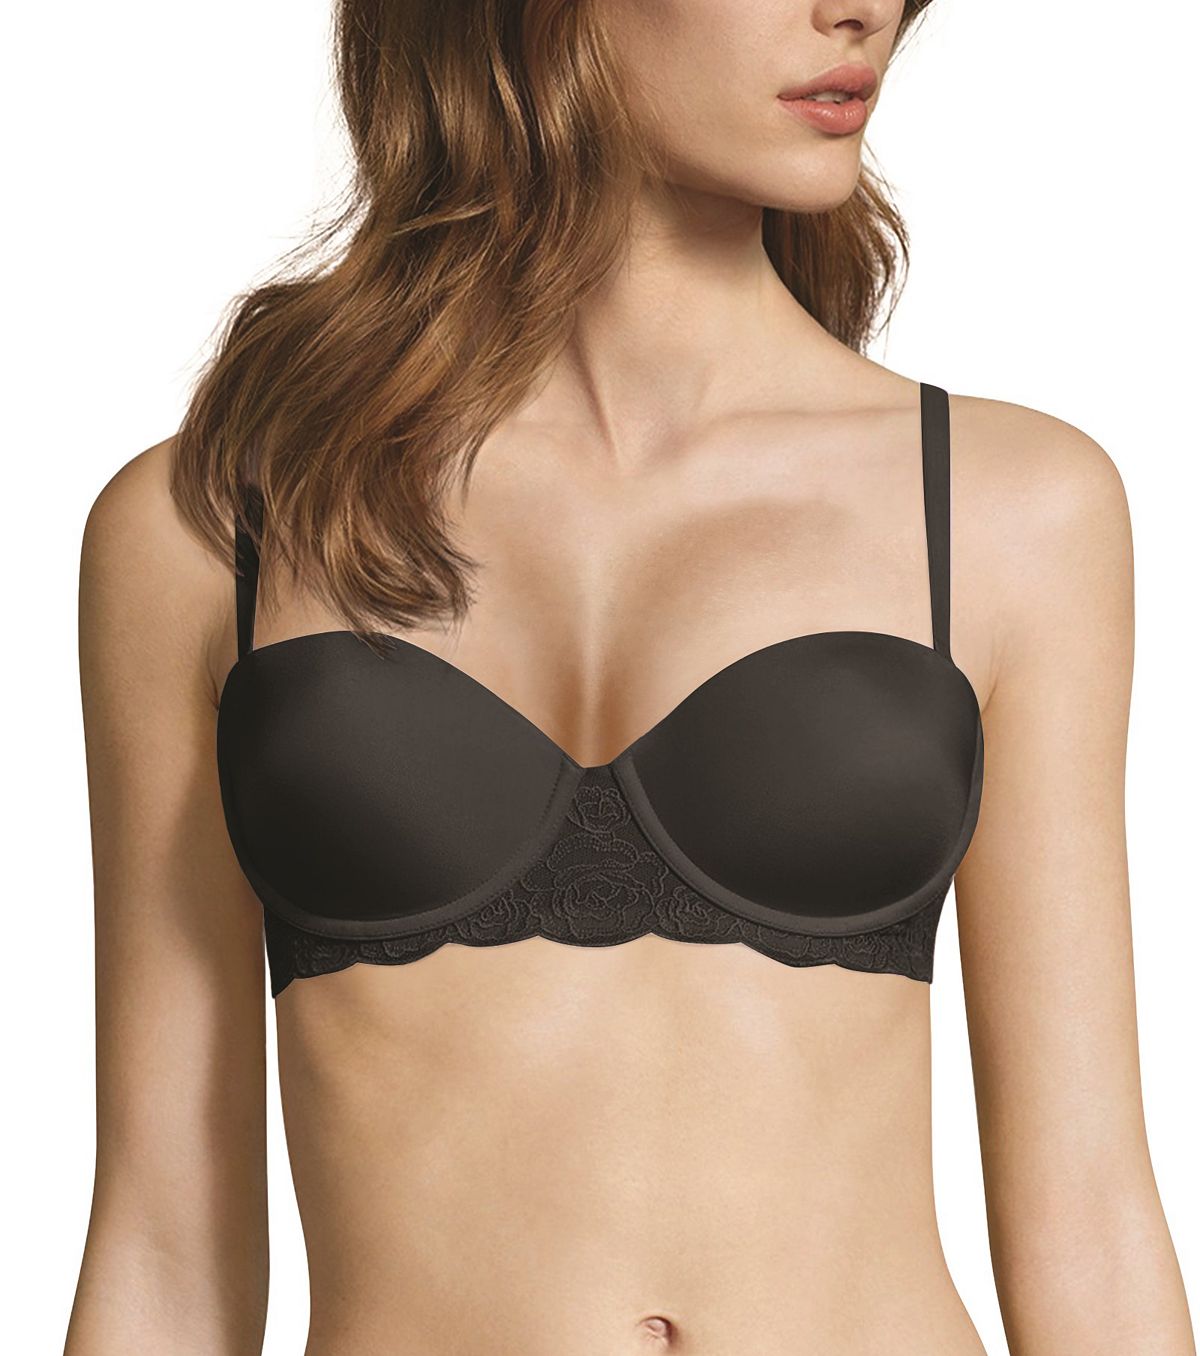 Maidenform Wo Love The Lift Embroidered Push-up Balconette Bra Dm9905 Black Lace